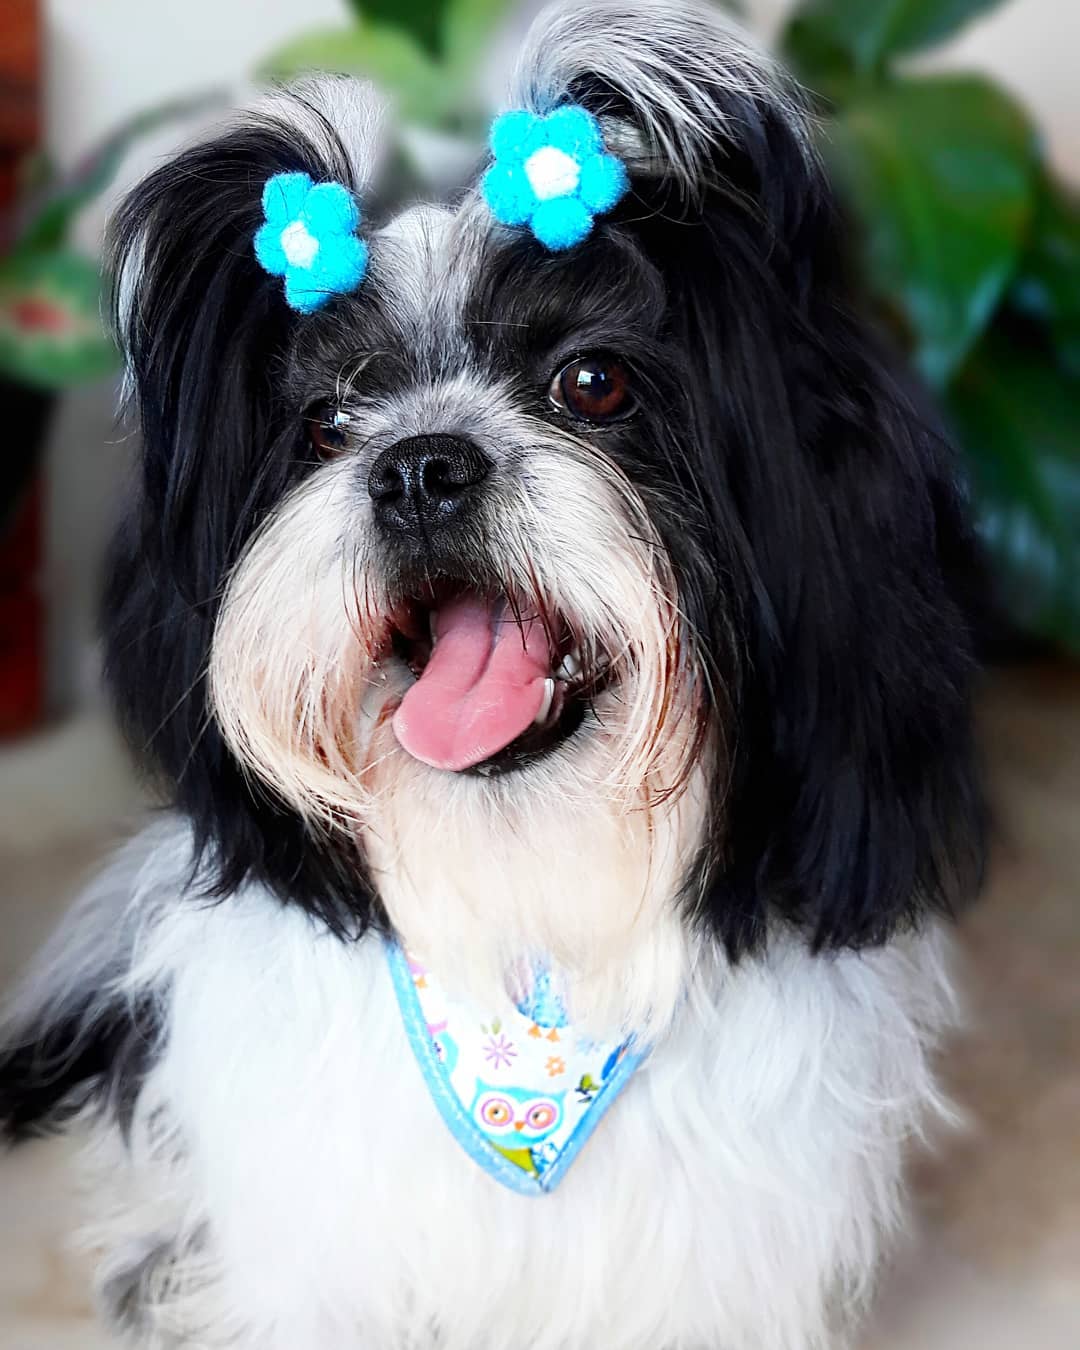 A Lhasa Apso wearing blue flower tie on top of its head while sitting on the floor and smiling